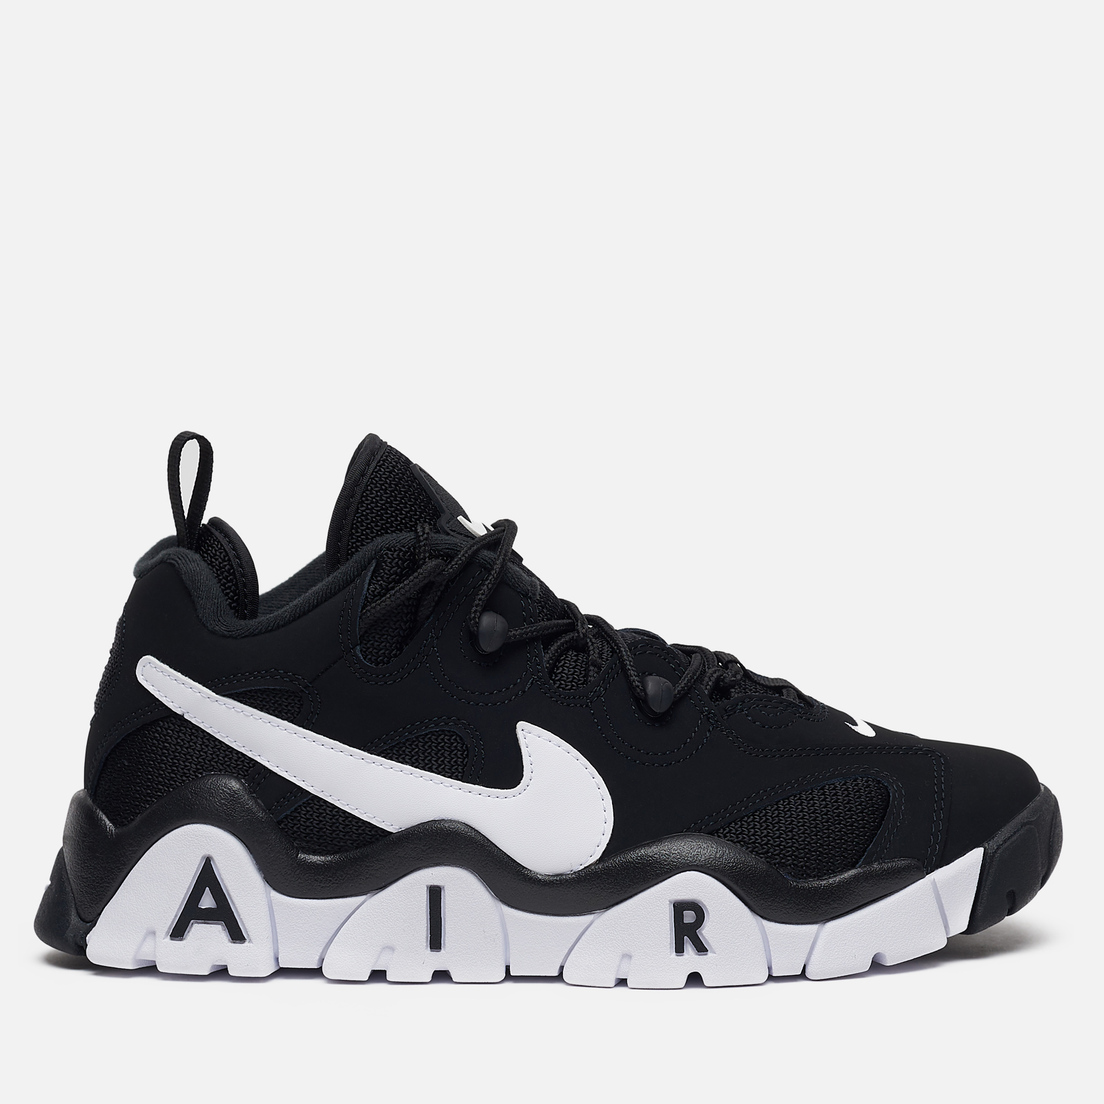 nike air barrage black and white low